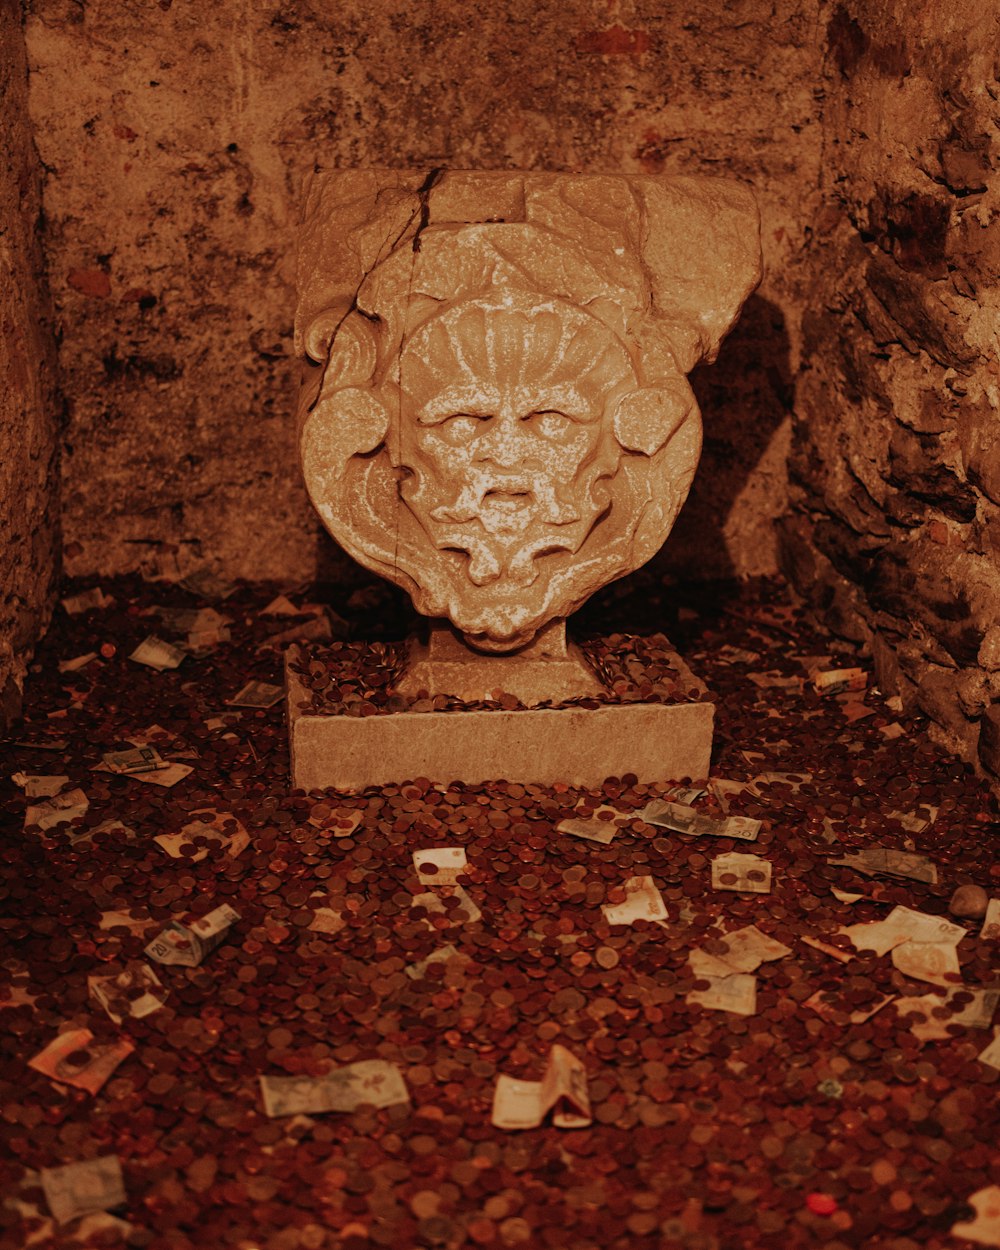 a statue of a lion surrounded by coins